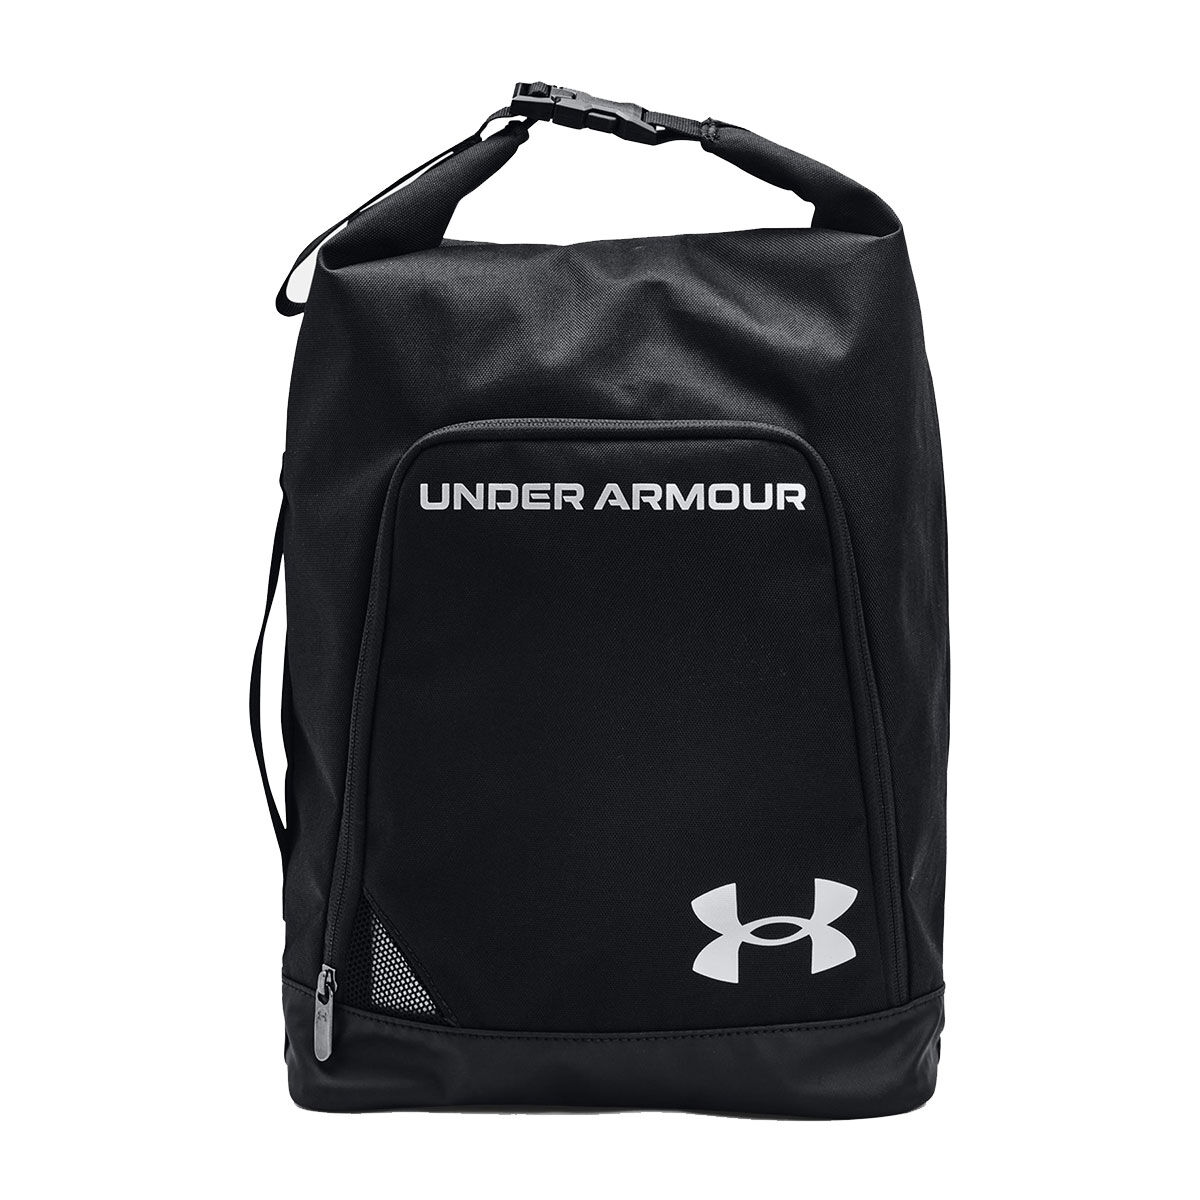 Under Armour Mens Black and White Long Lasting Contain Golf Shoe Bag, Size: 4.7X19.3X10.2"| American Golf